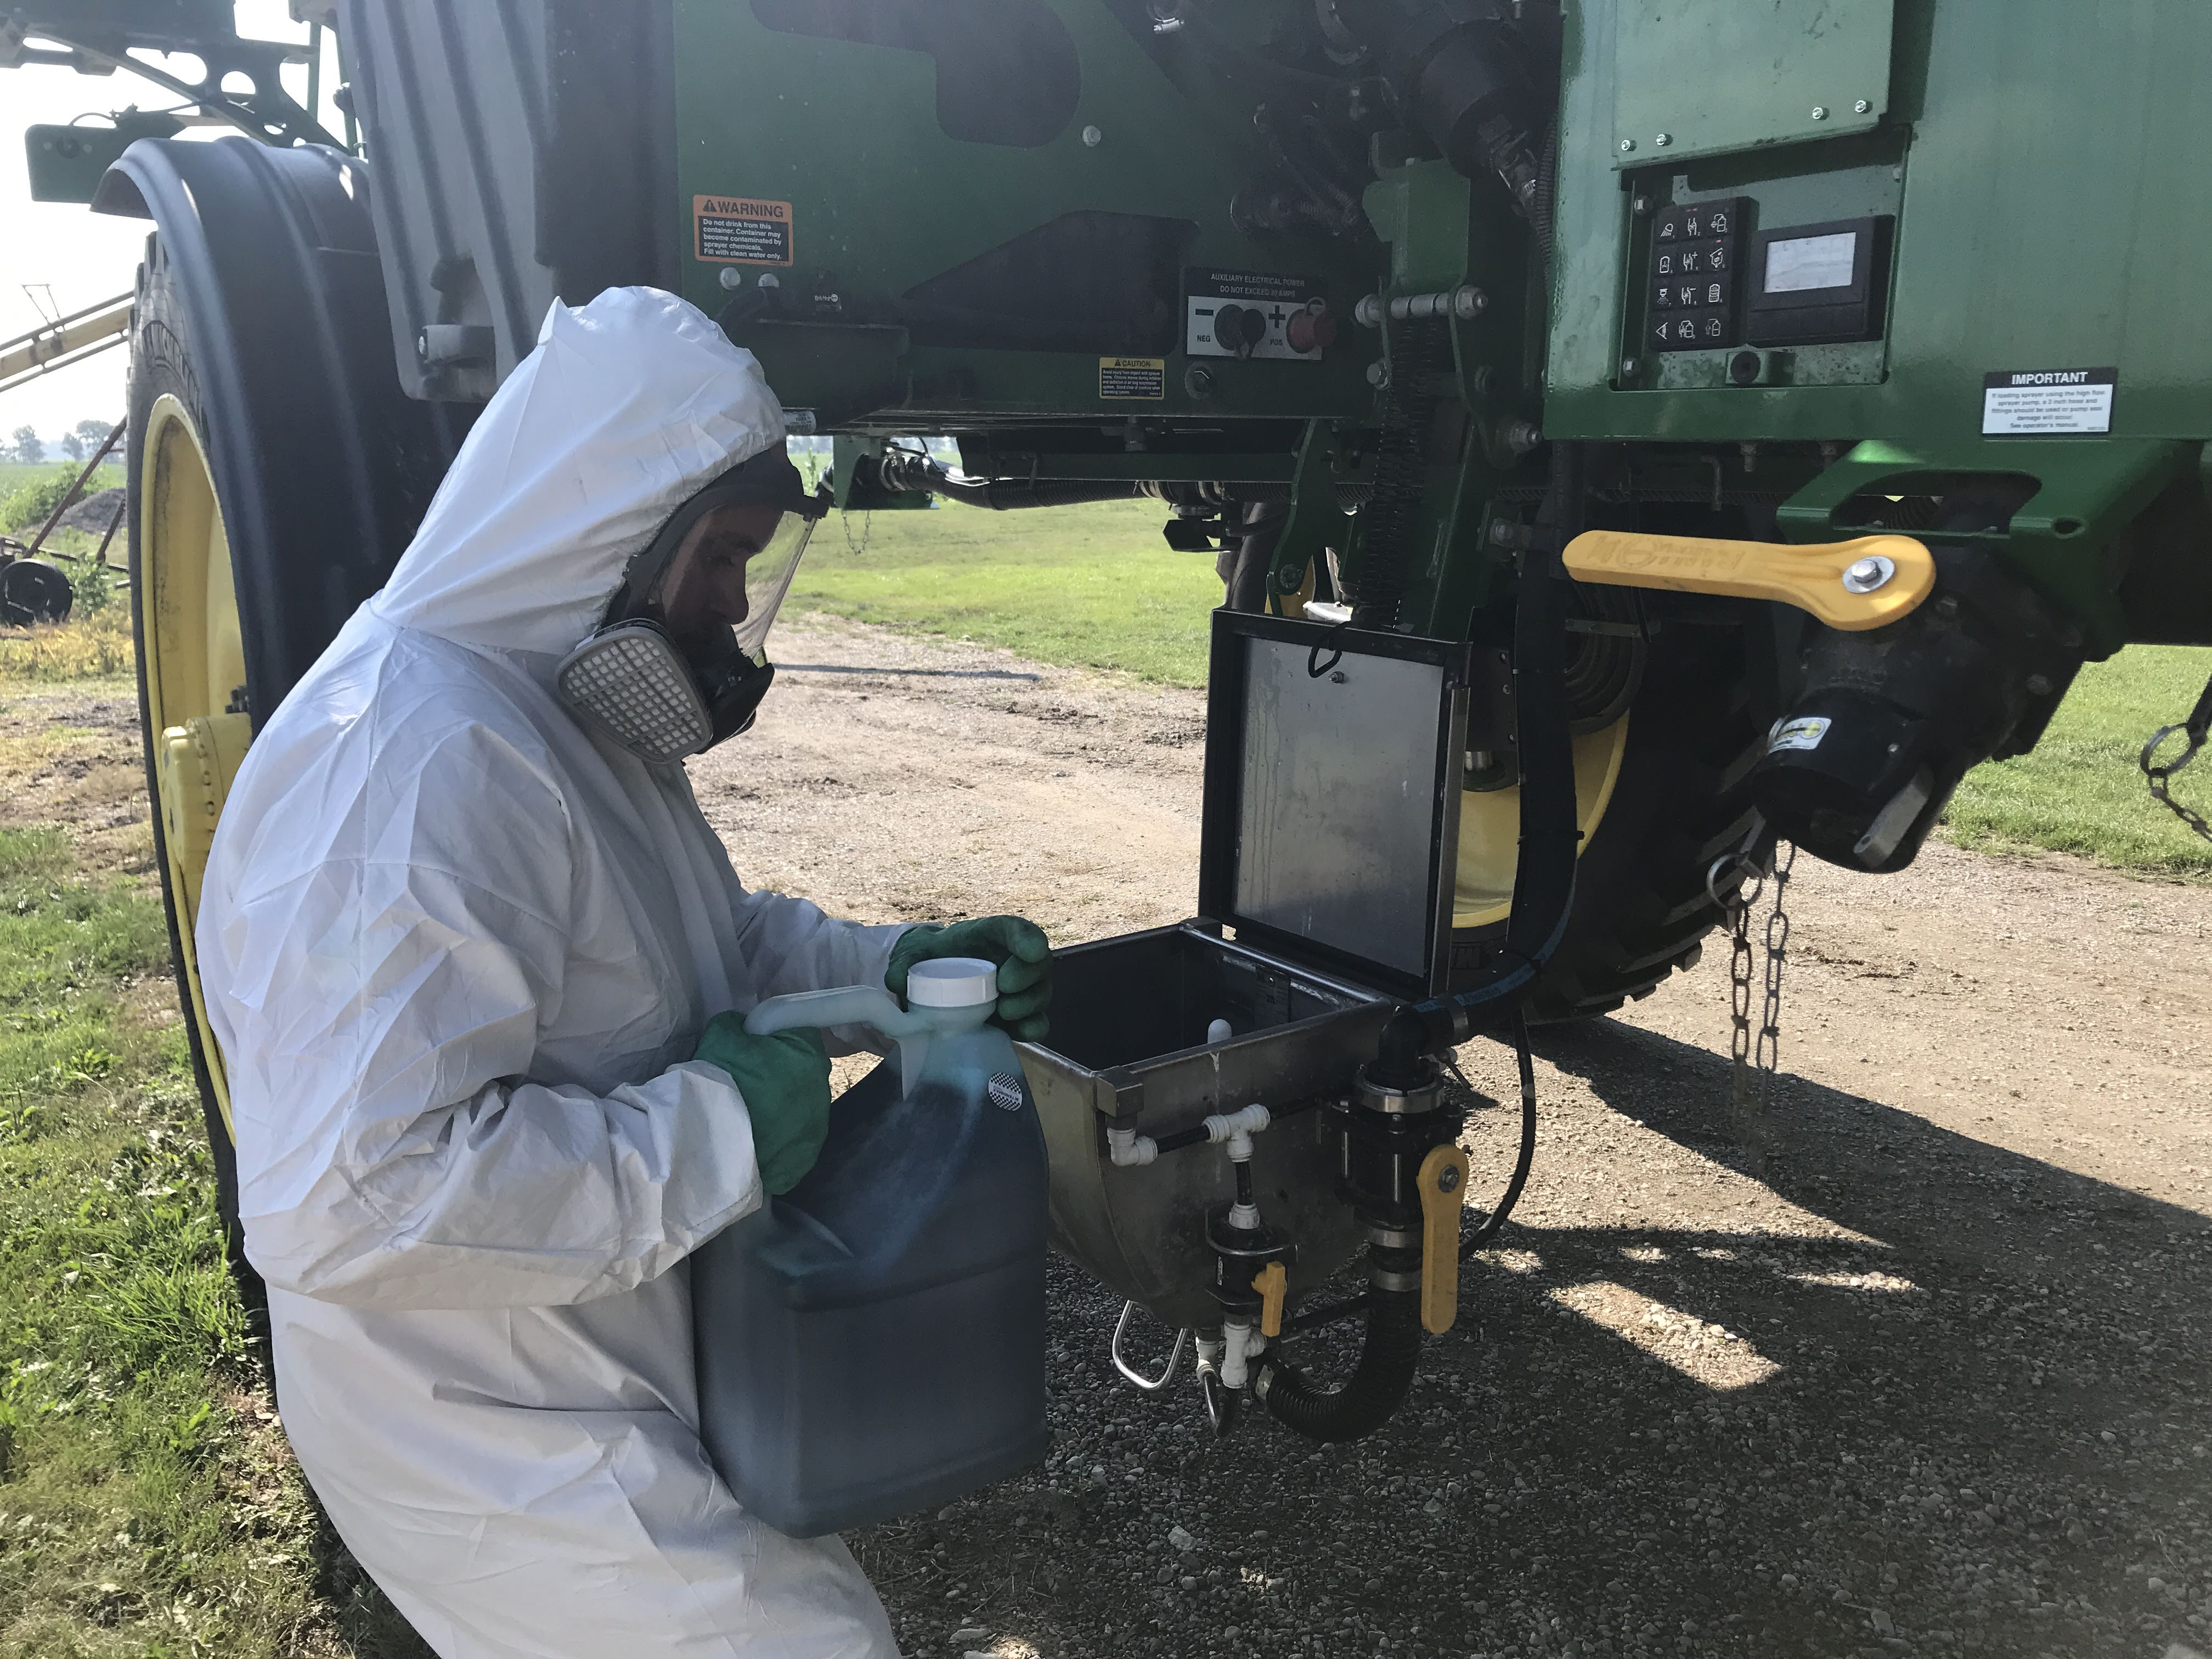 Use proper personal protective equipment when handling pesticides. This sprayer includes a ground-level mixing station to allow easy pesticide loading while minimizing the risk of spills.